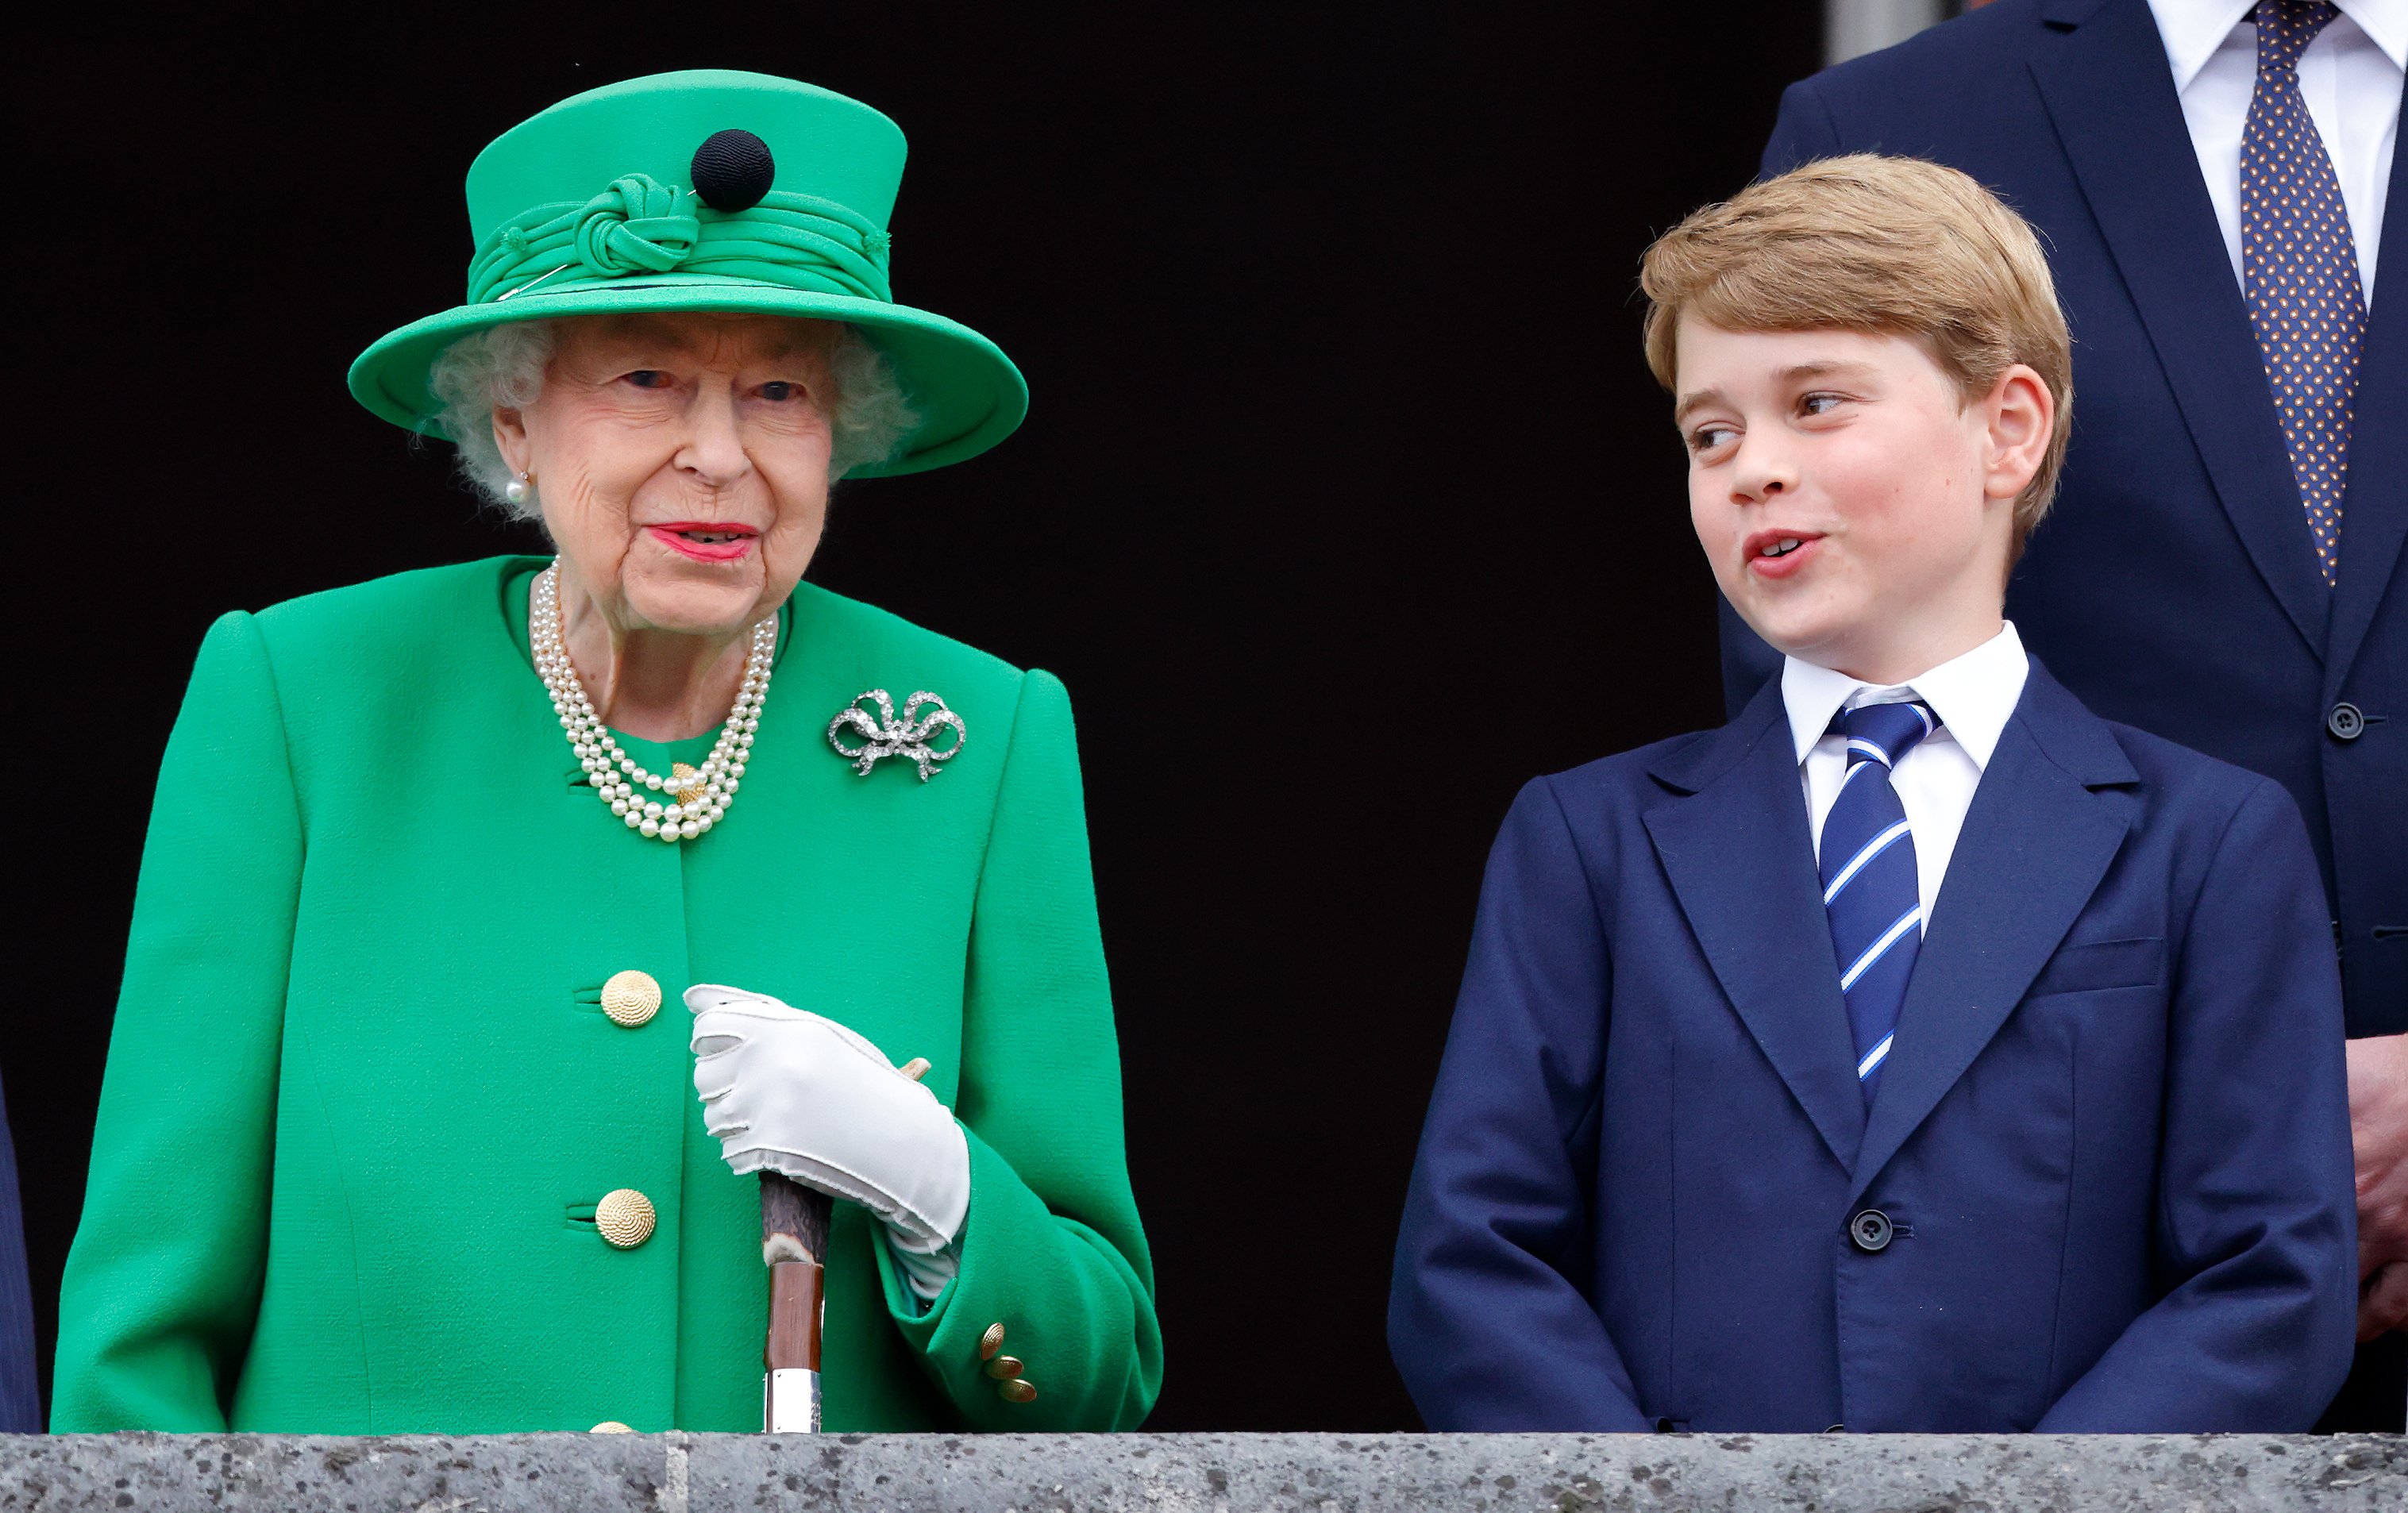 Queen Elizabeth II and Prince George stand on the balcony of Buckingham Palace following the Platinum Pageant on June 5, 2022, in London, England. | Source: Getty Images